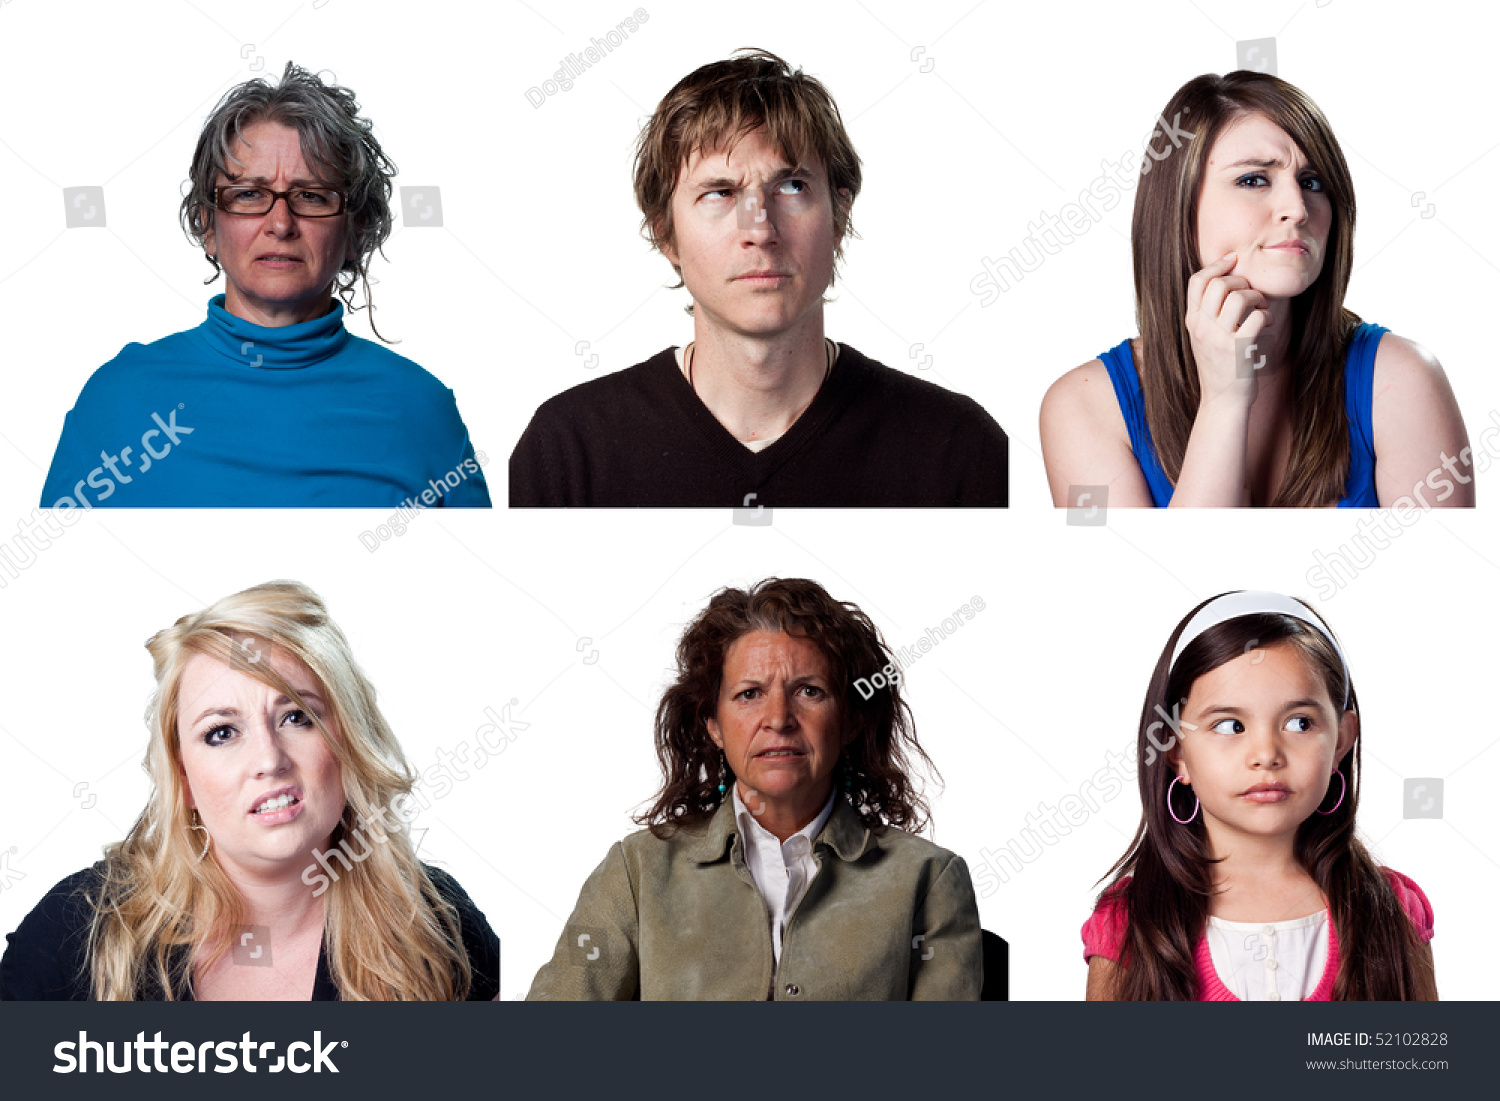 People Thinking Hard About Big Decision Stock Photo 52102828 - Shutterstock